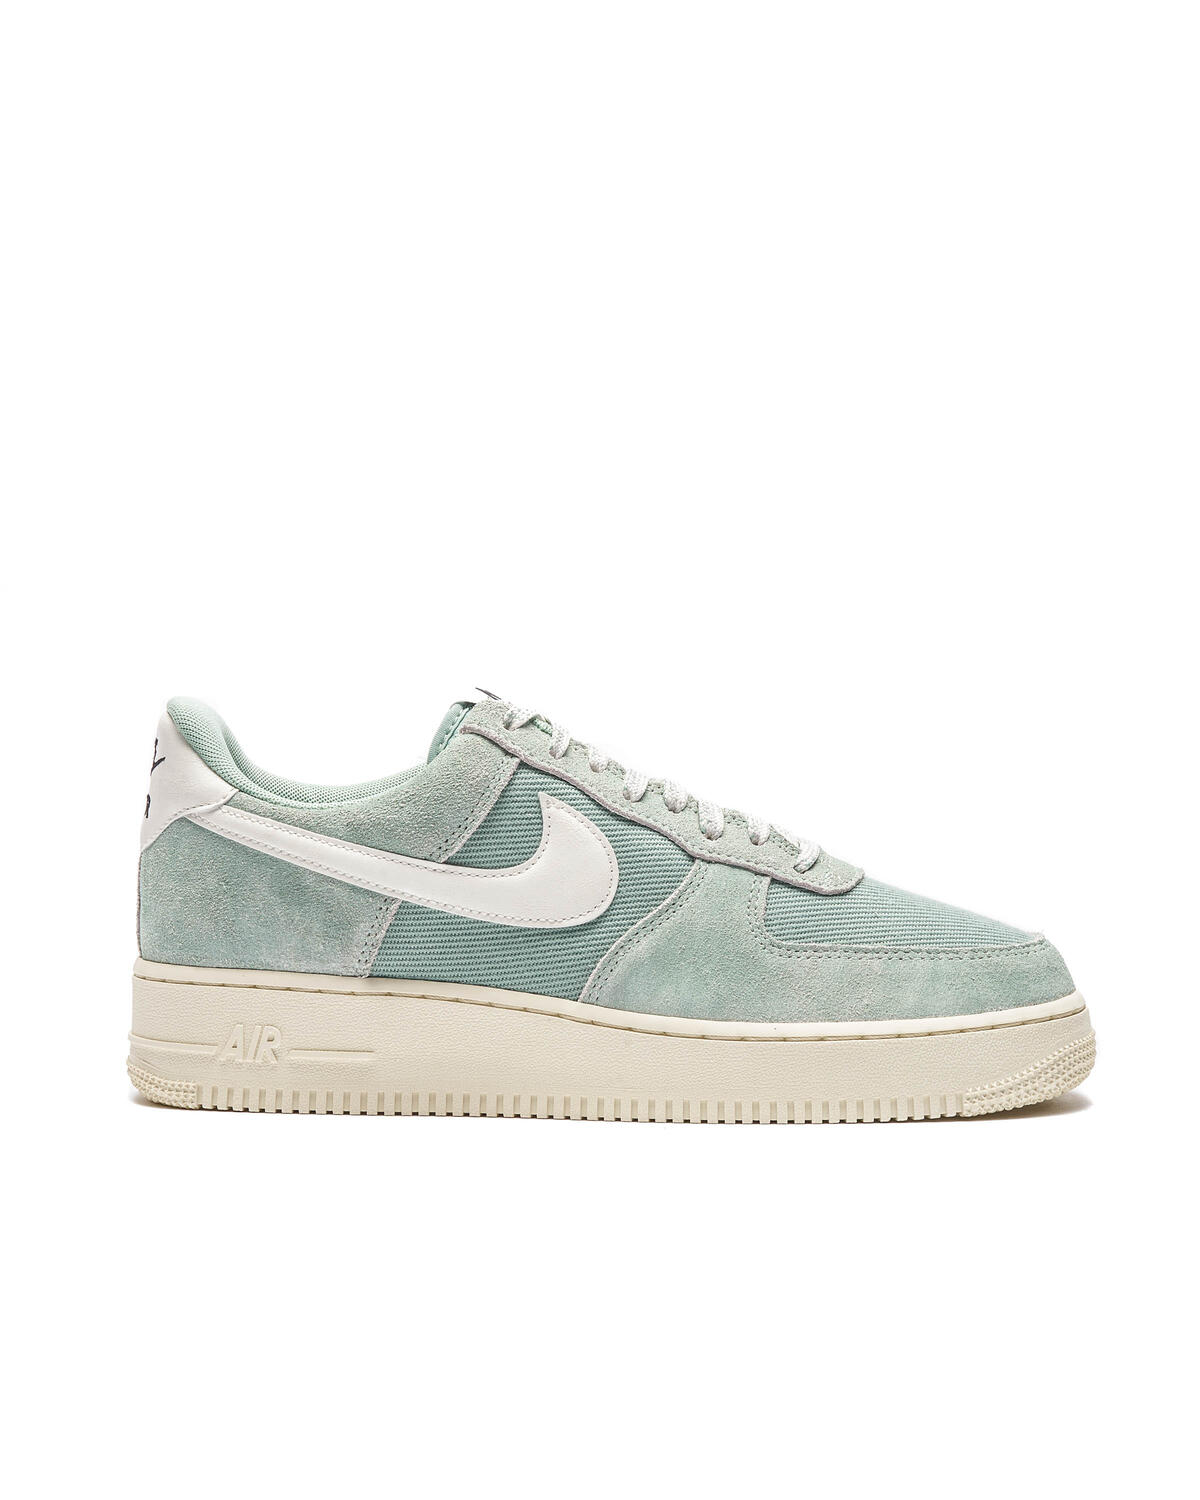 Nike AIR FORCE 1 '07 LV8 | DO9801-300 | AFEW STORE